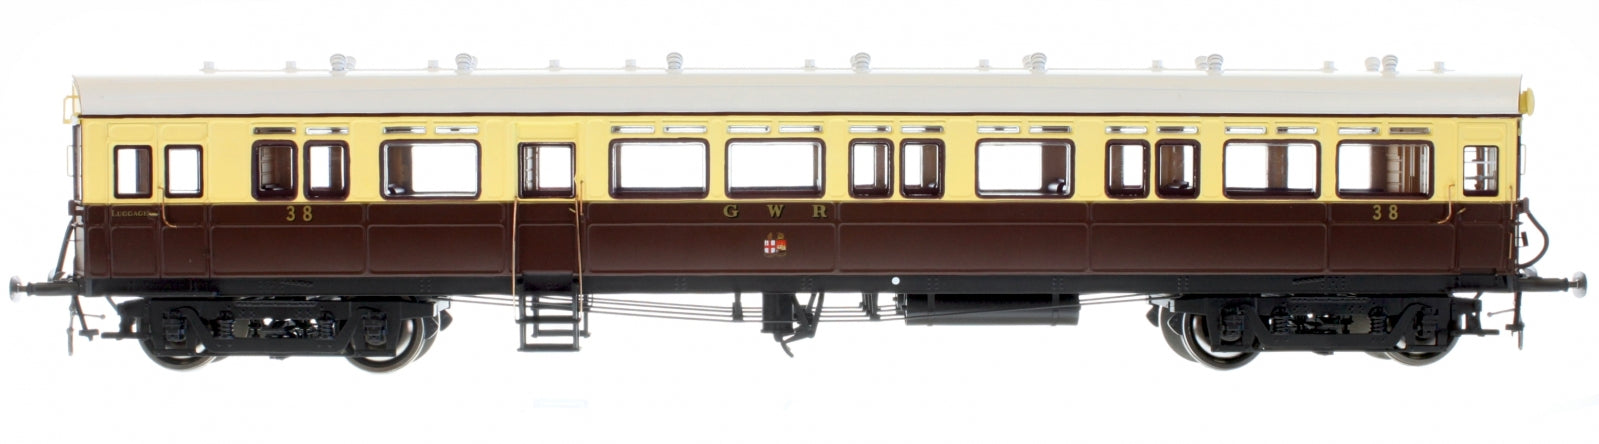 7P-004-011 O Gauge Autocoach GWR Twin Cities Crest 38 Choc & Crm